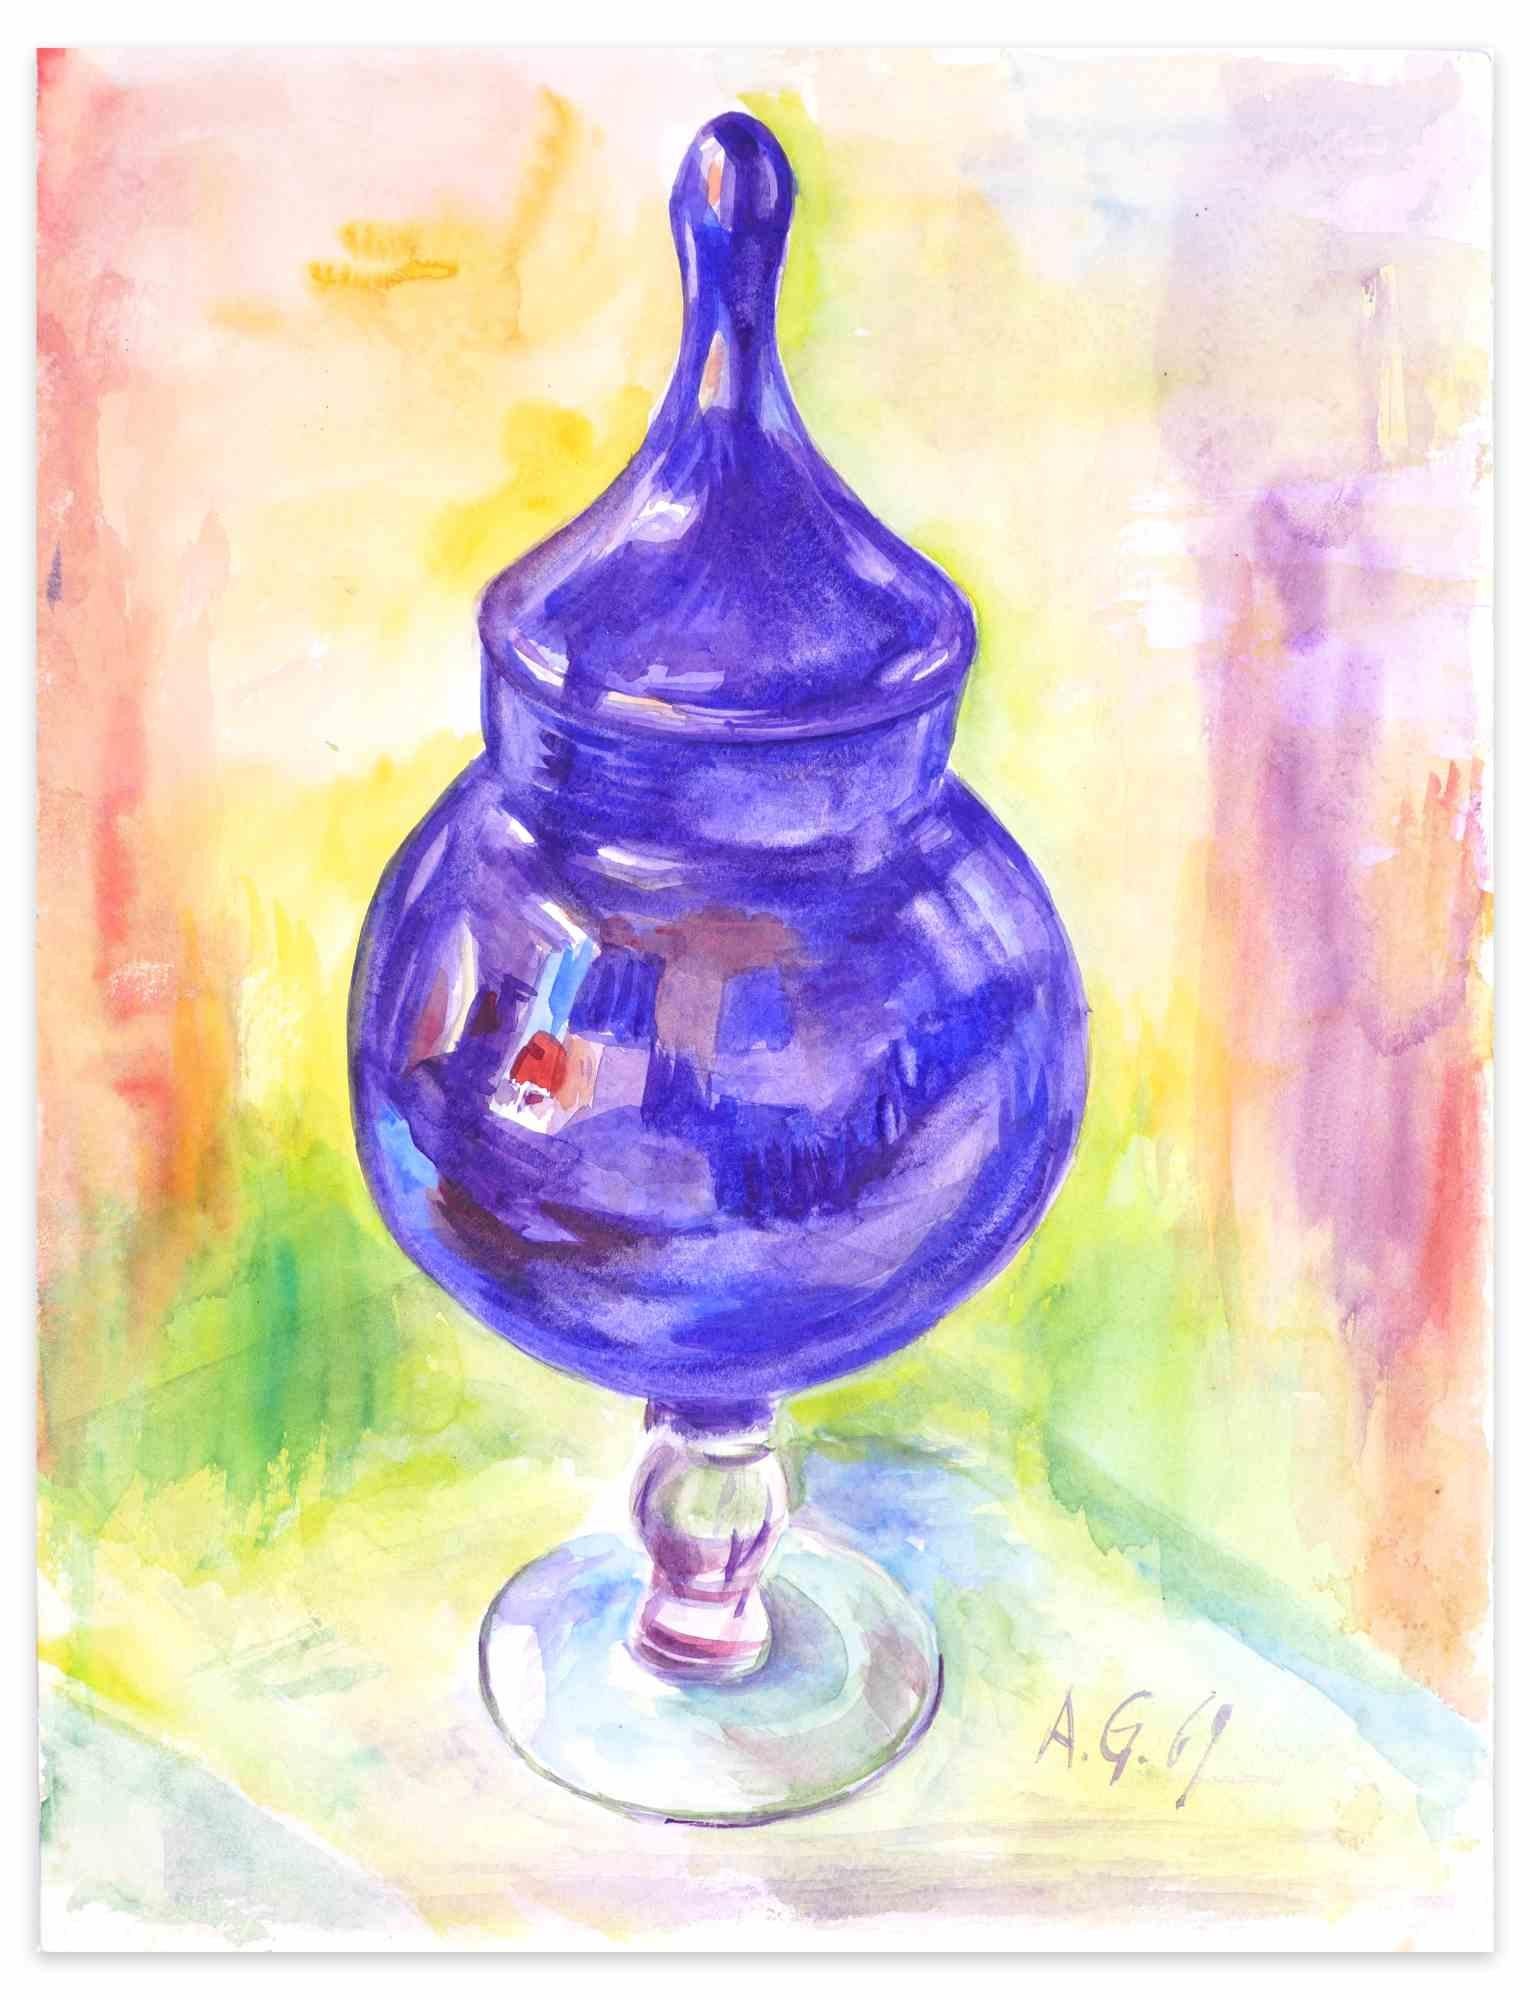 Violet Chocolate Vase is a drawing in watercolor realized by Armin Guther in 1969.

Monogrammed on the lower.

Good conditions, aged margins.

The artwork is represented through harmonious congruent colors beautifully.

 